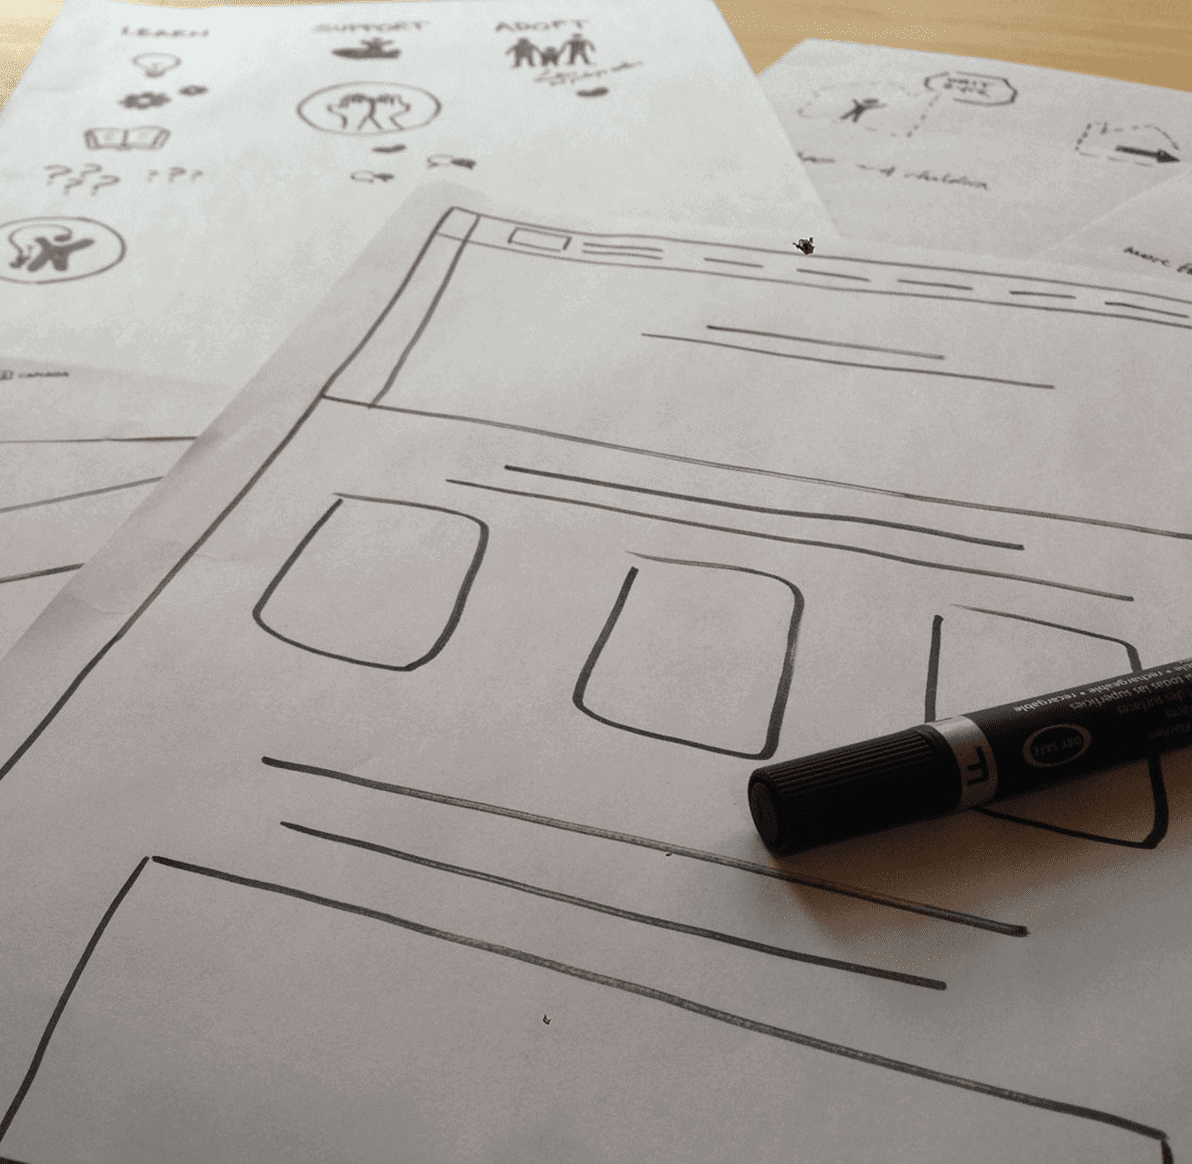 Wireframe sketches of the Dave Thomas Foundation for Adoption website